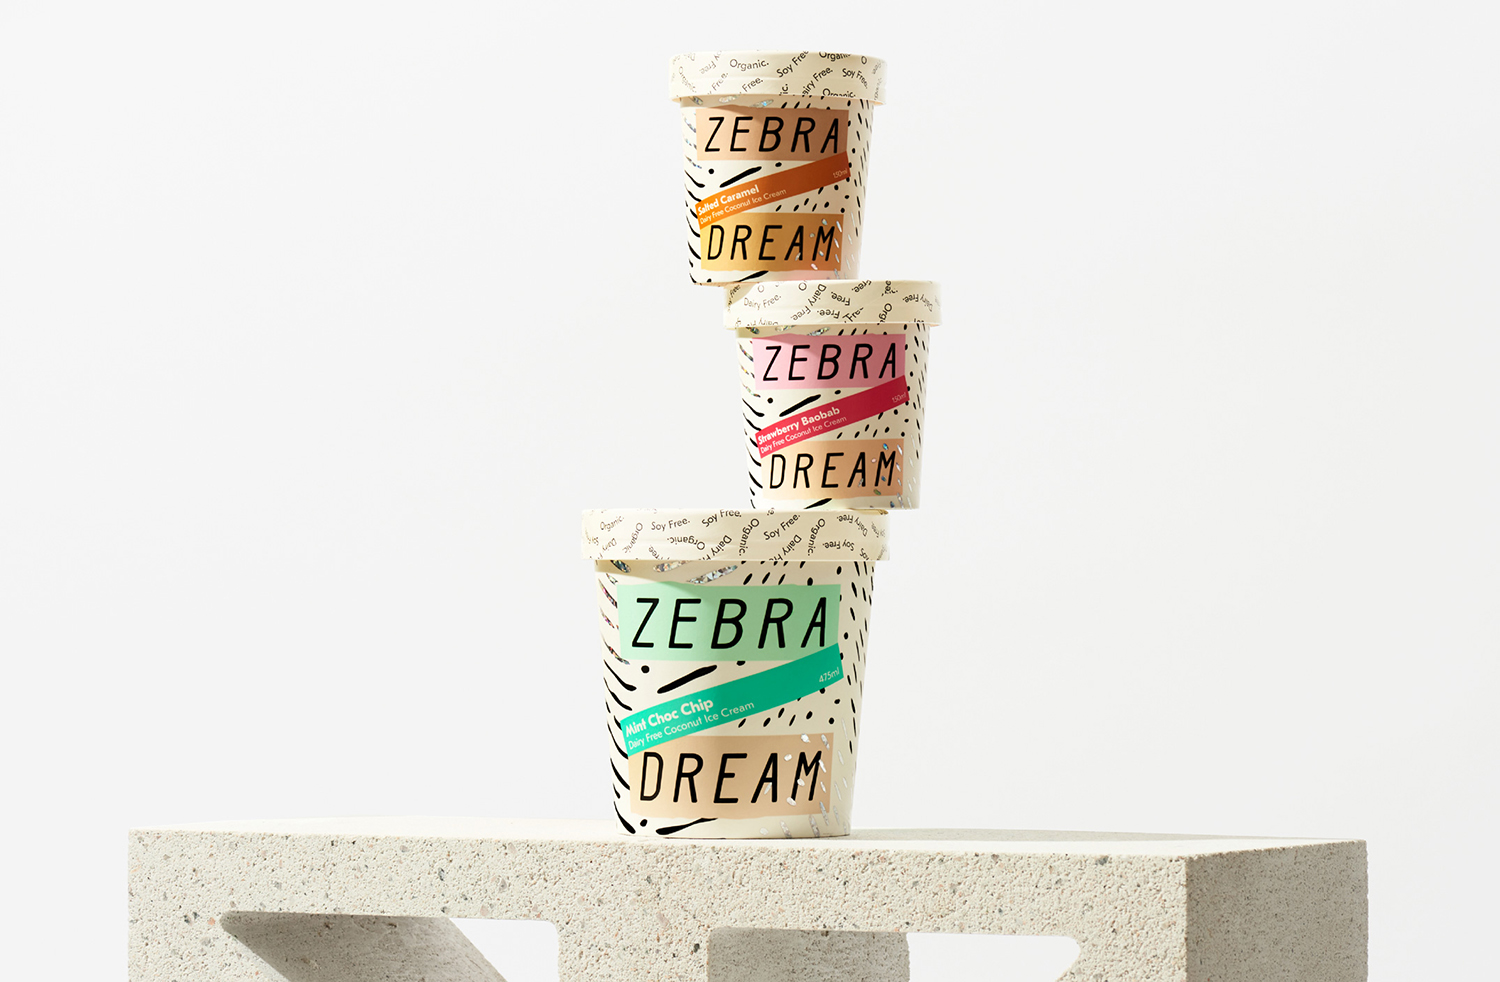 New logo, graphic identity and packaging by Australia design studio The Company You Keep for coconut ice-cream Zebra Dream